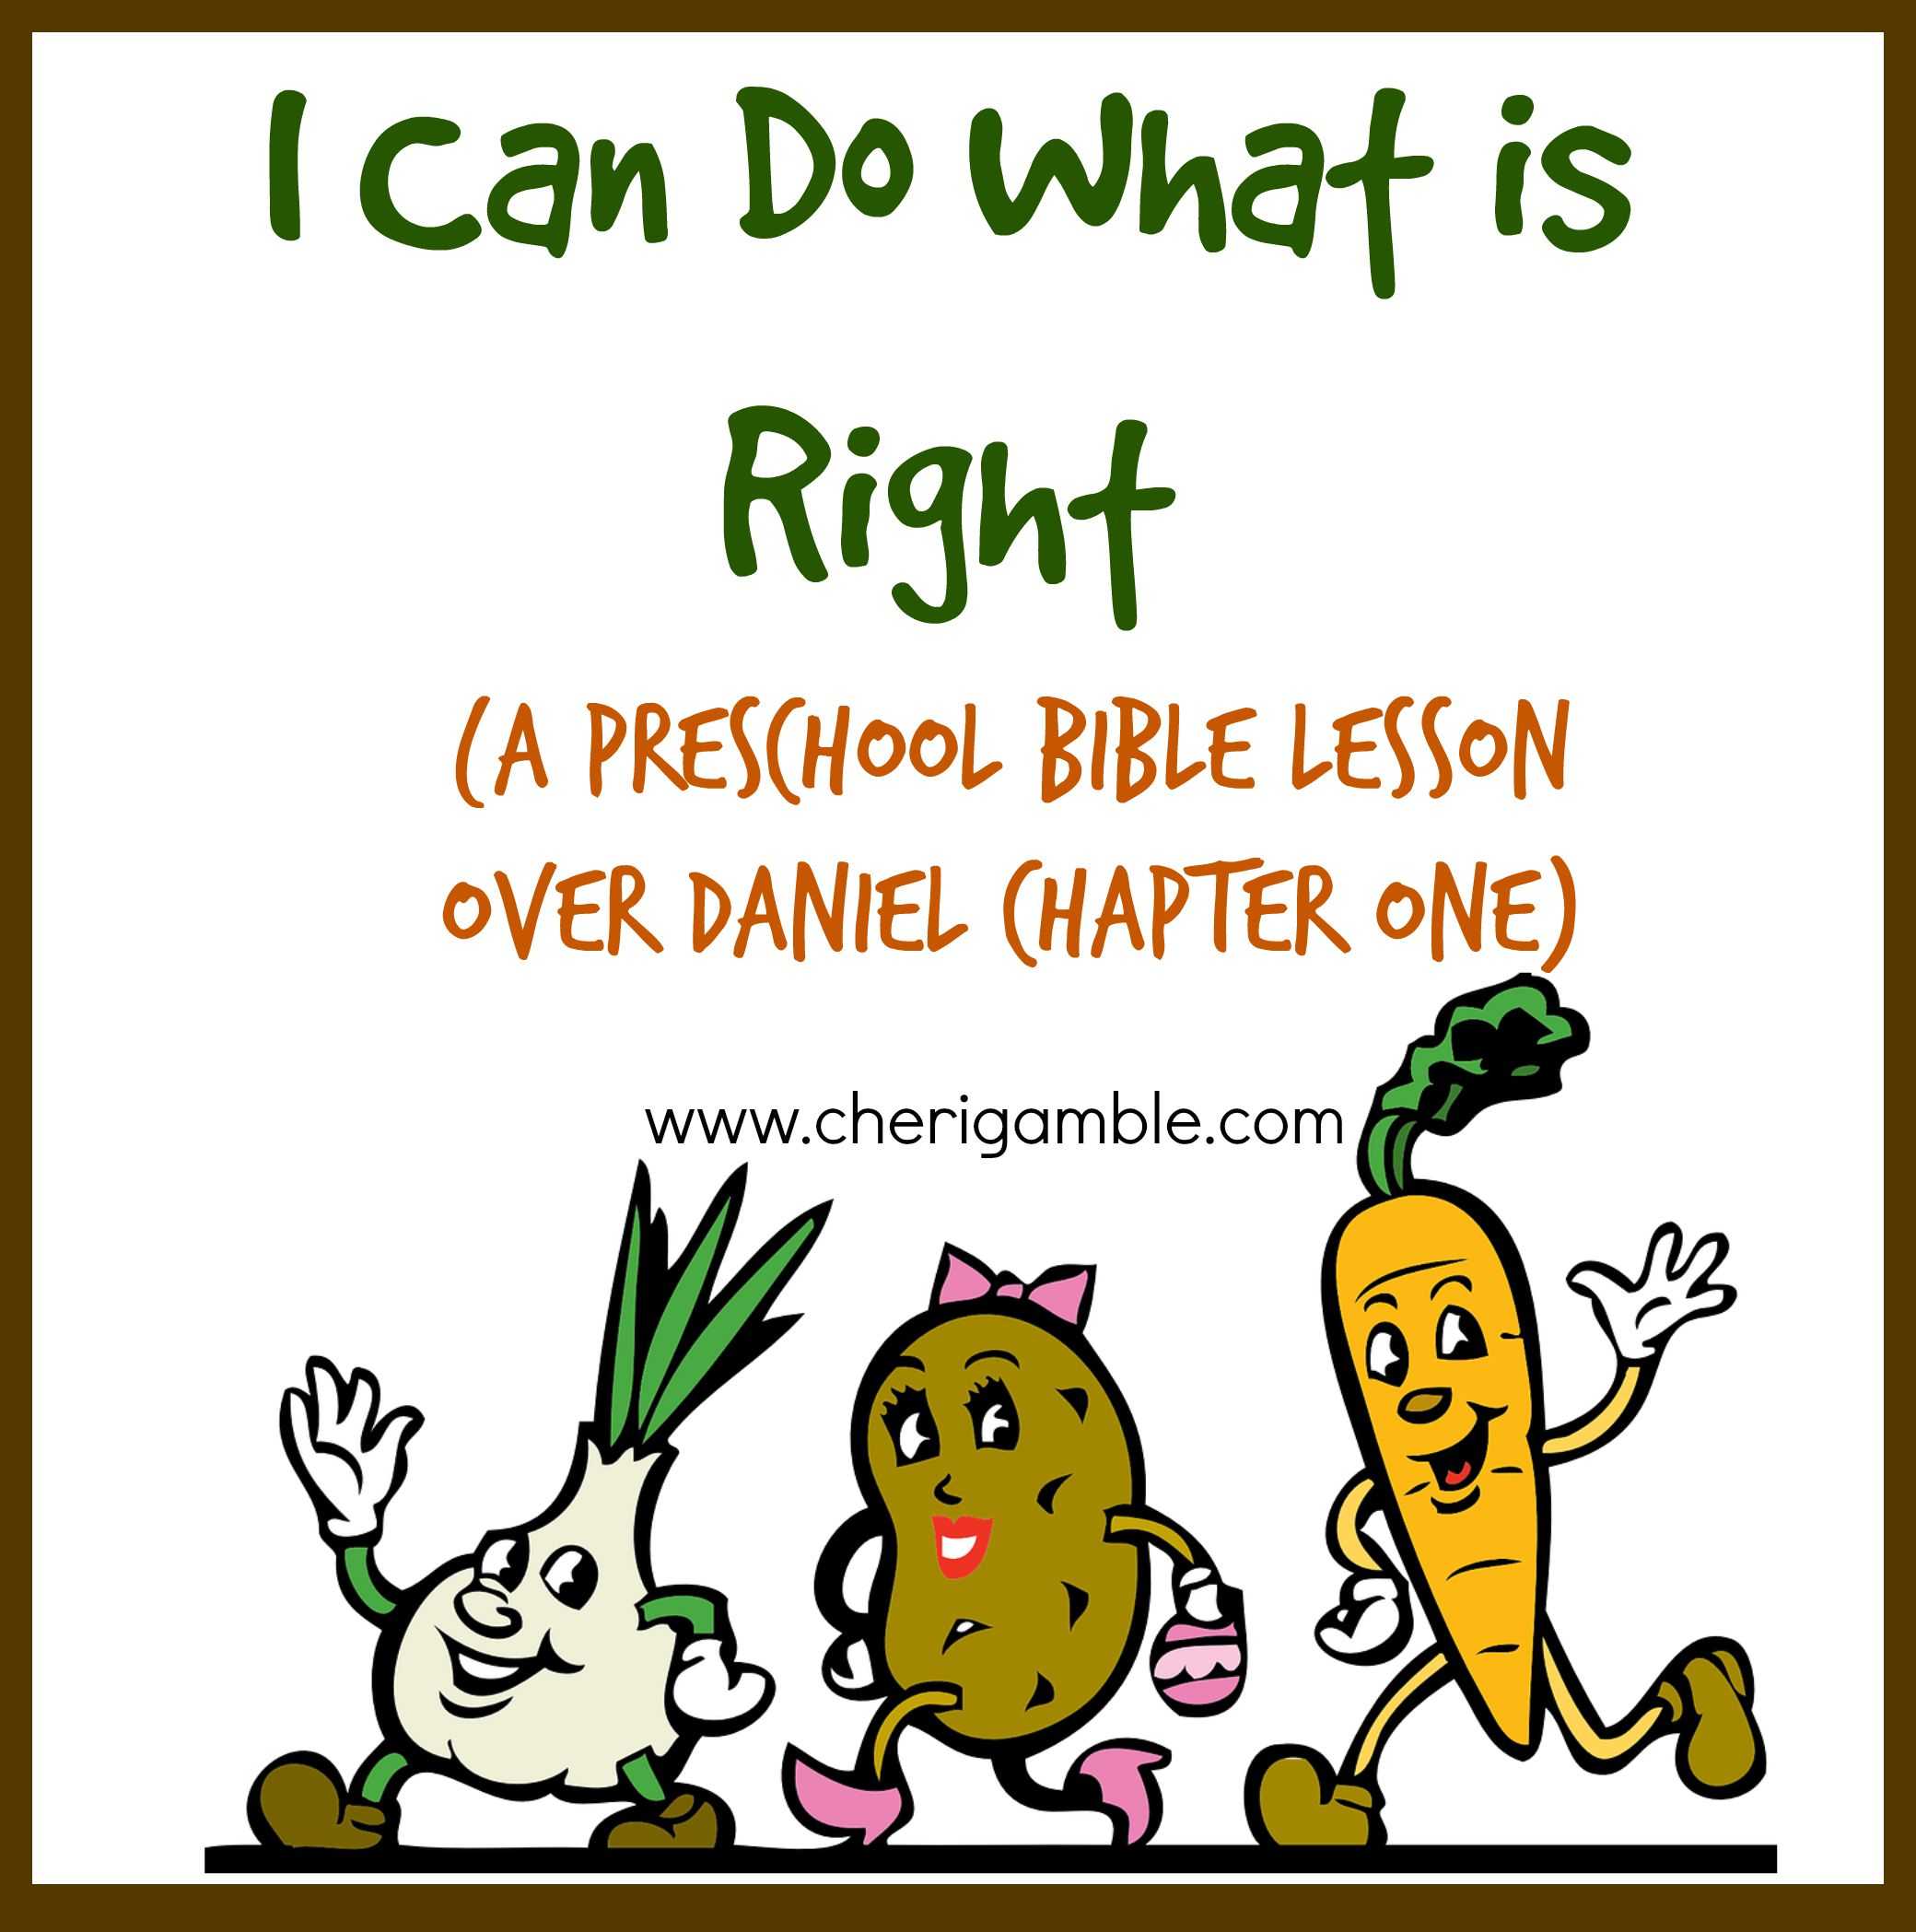 Free Bible Worksheets for Kids and I Can Do What is Right A Preschool Bible Lesson Over Daniel 1